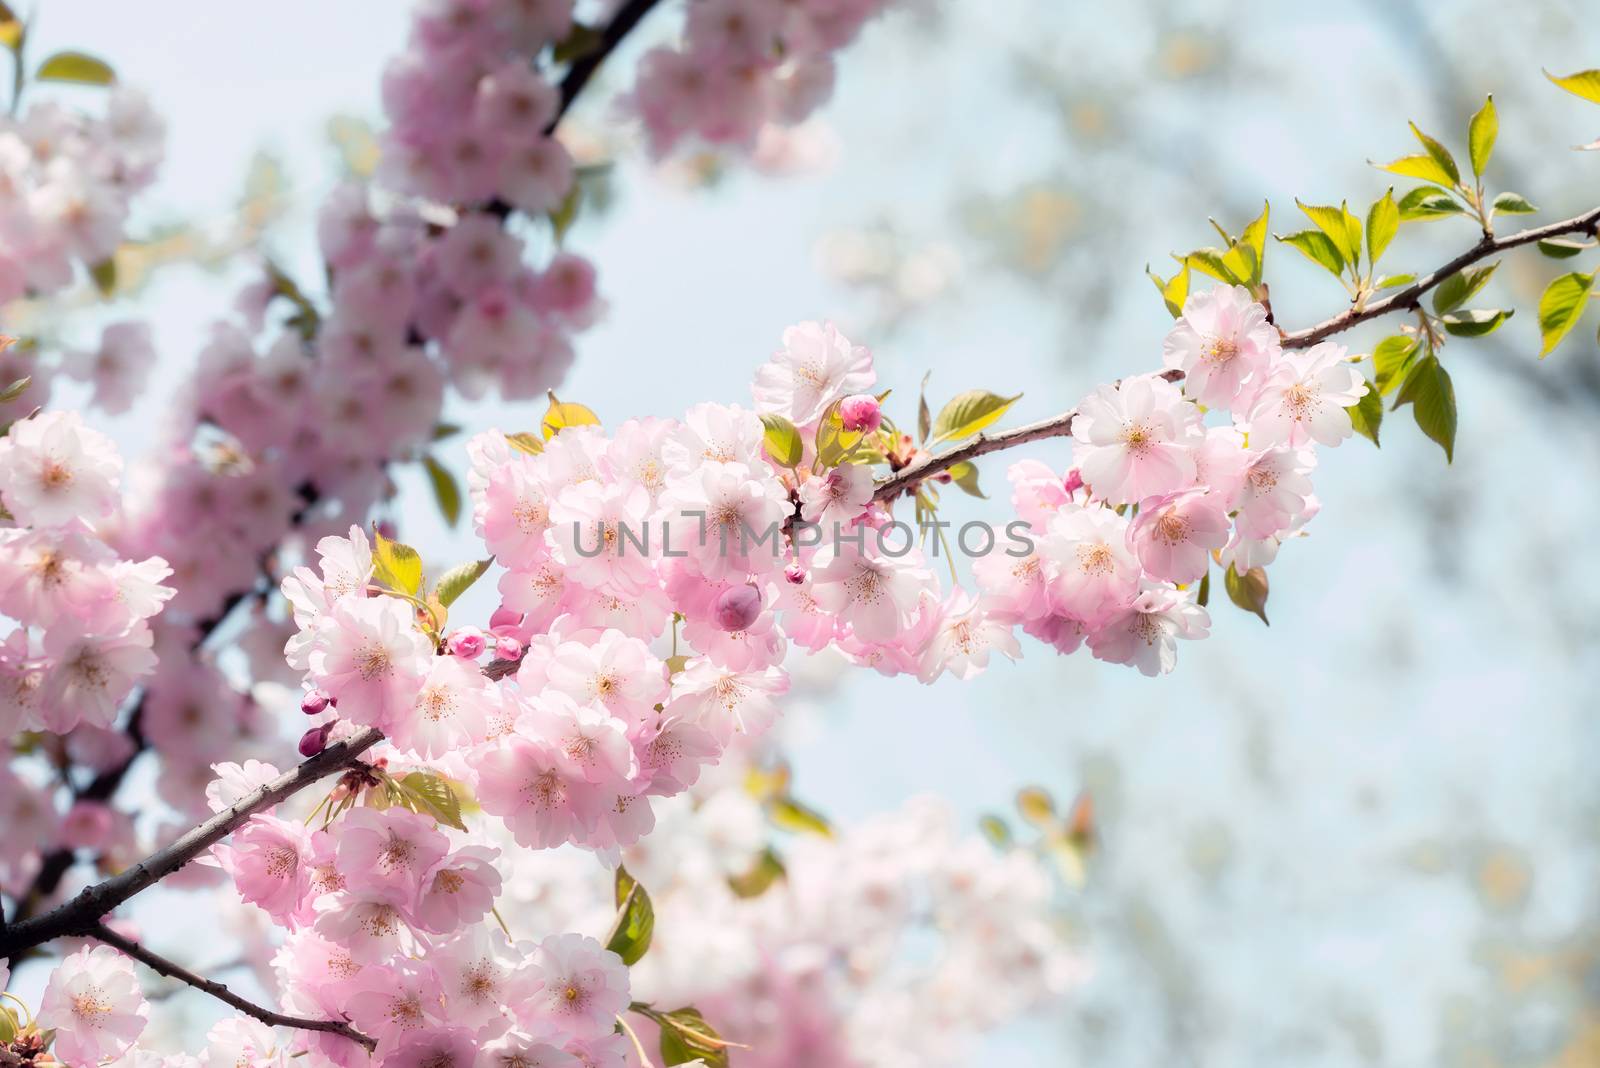 Nice pink Cherry Blossom flowers under the warm spring sun, in a dreamy atmosphere